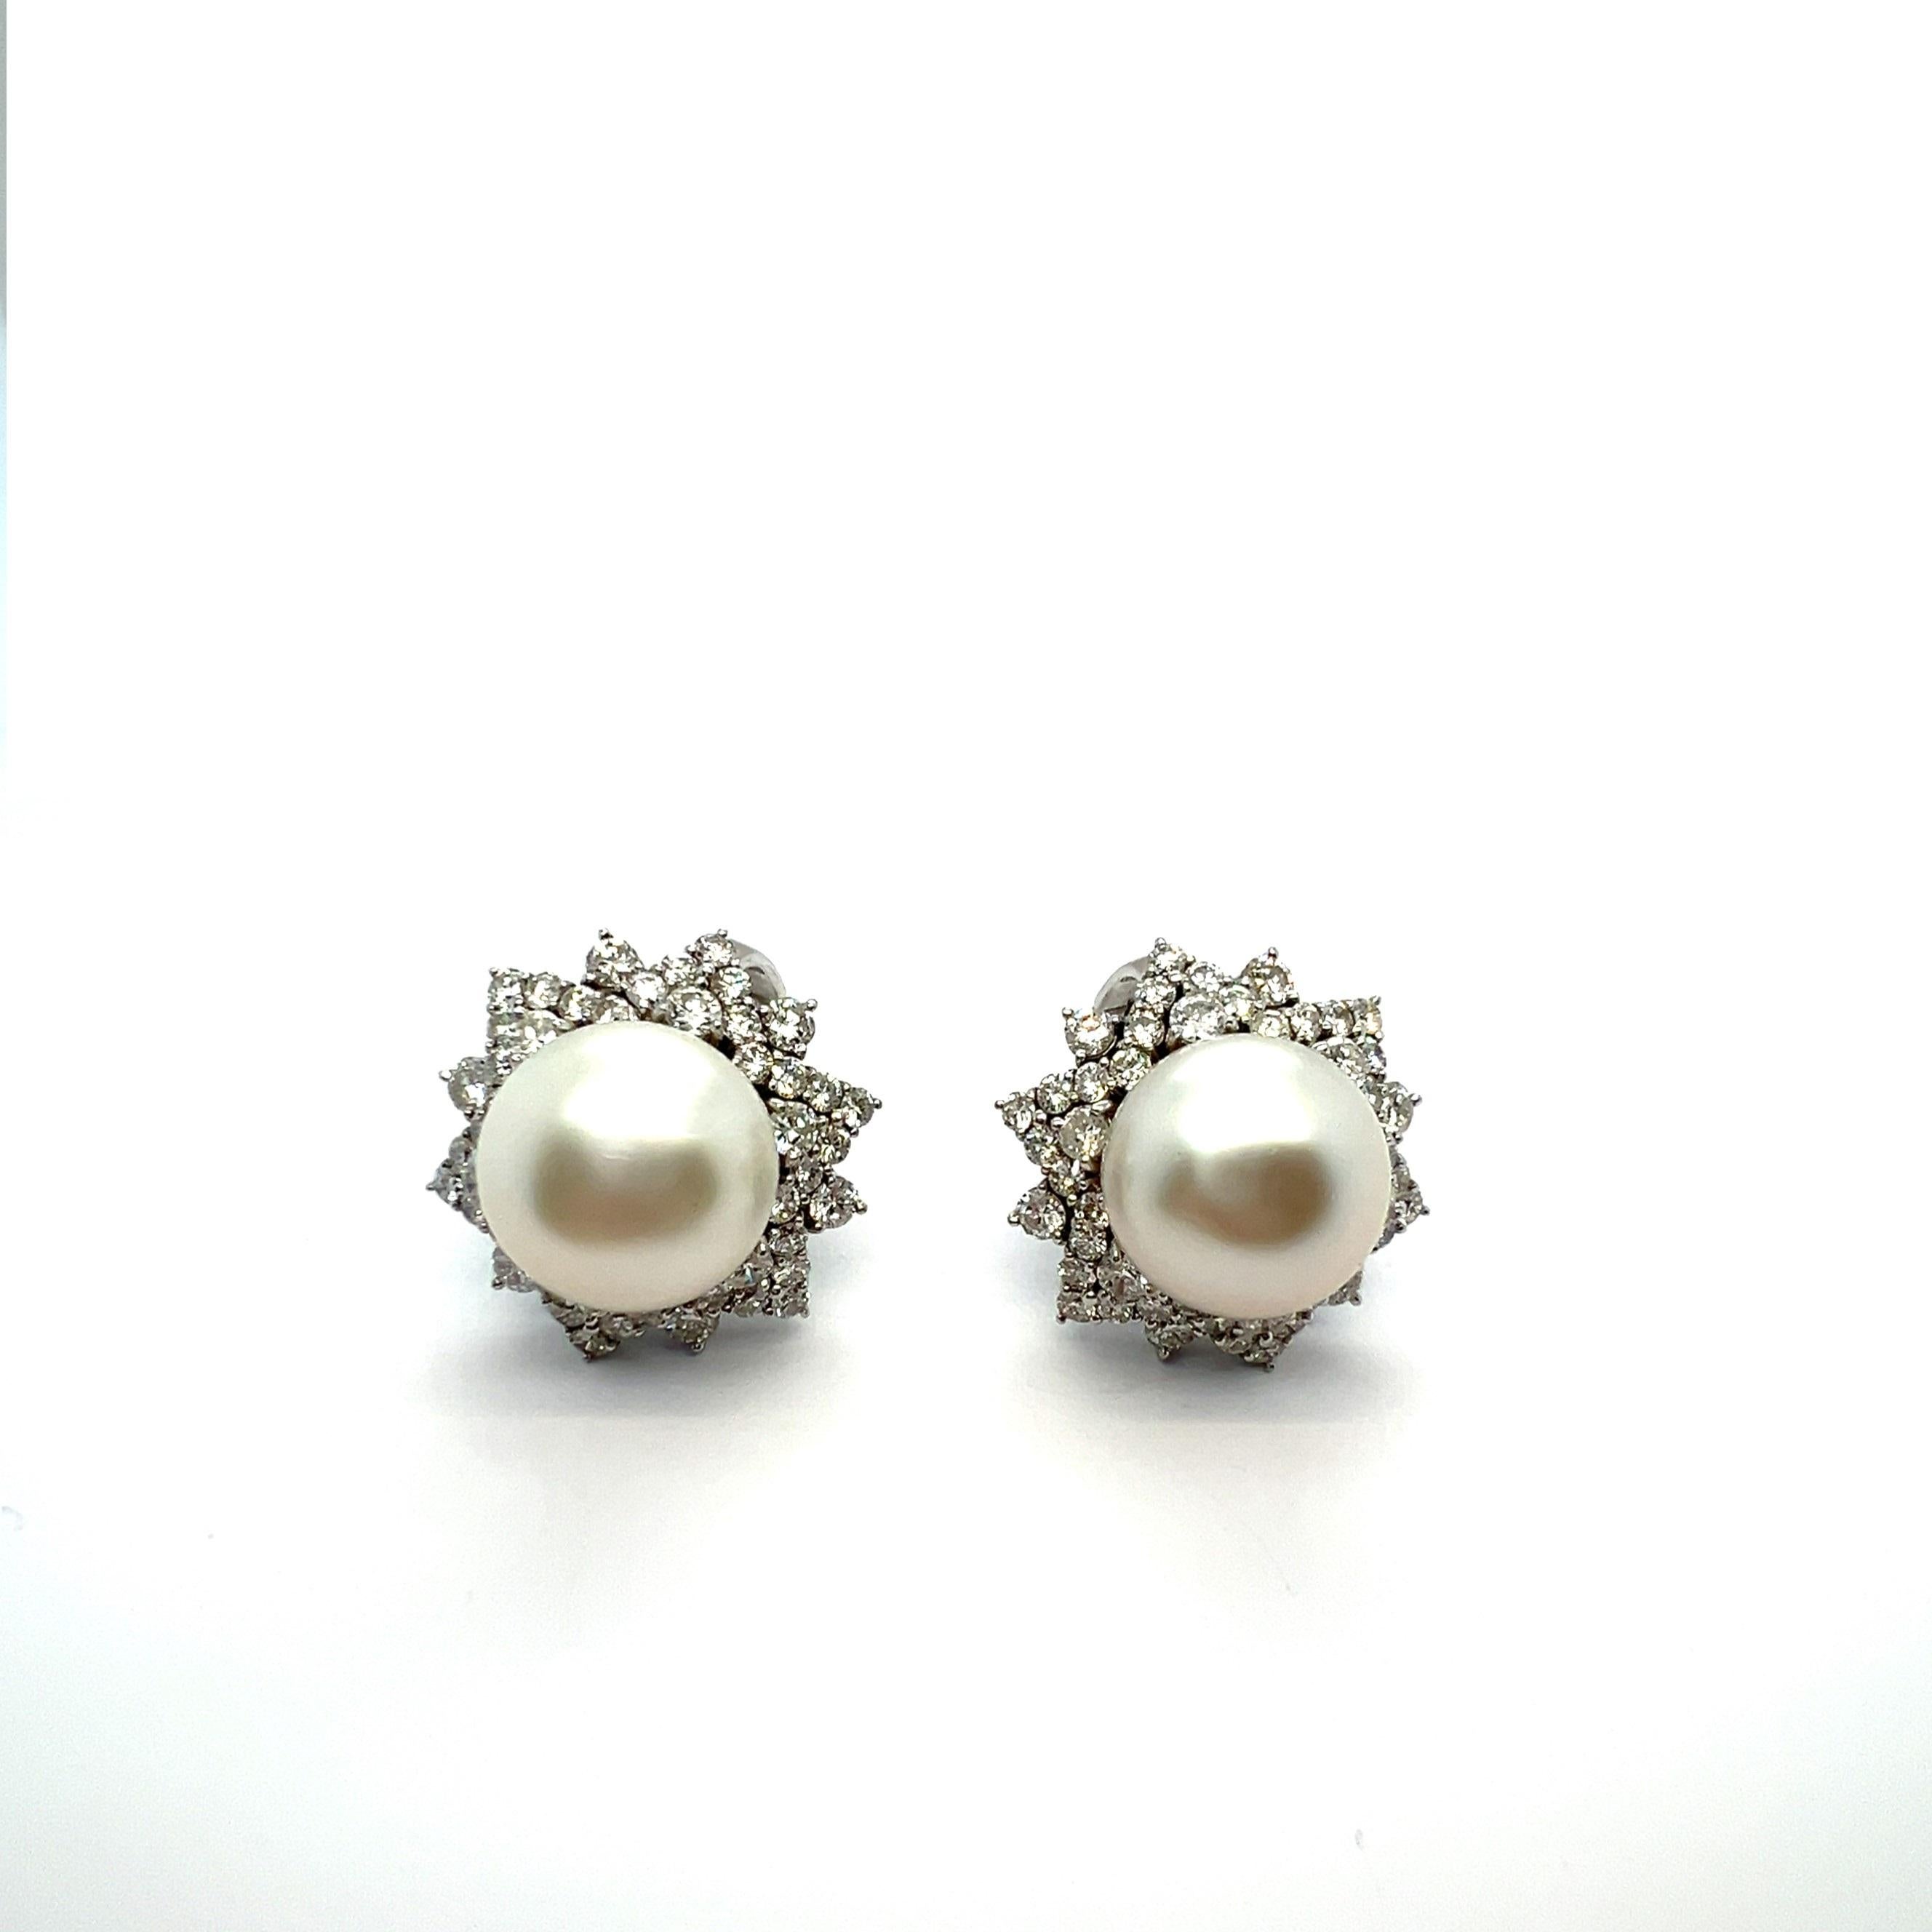 South Sea Pearl Earrings in 18 Karat White Gold by Meister For Sale 5